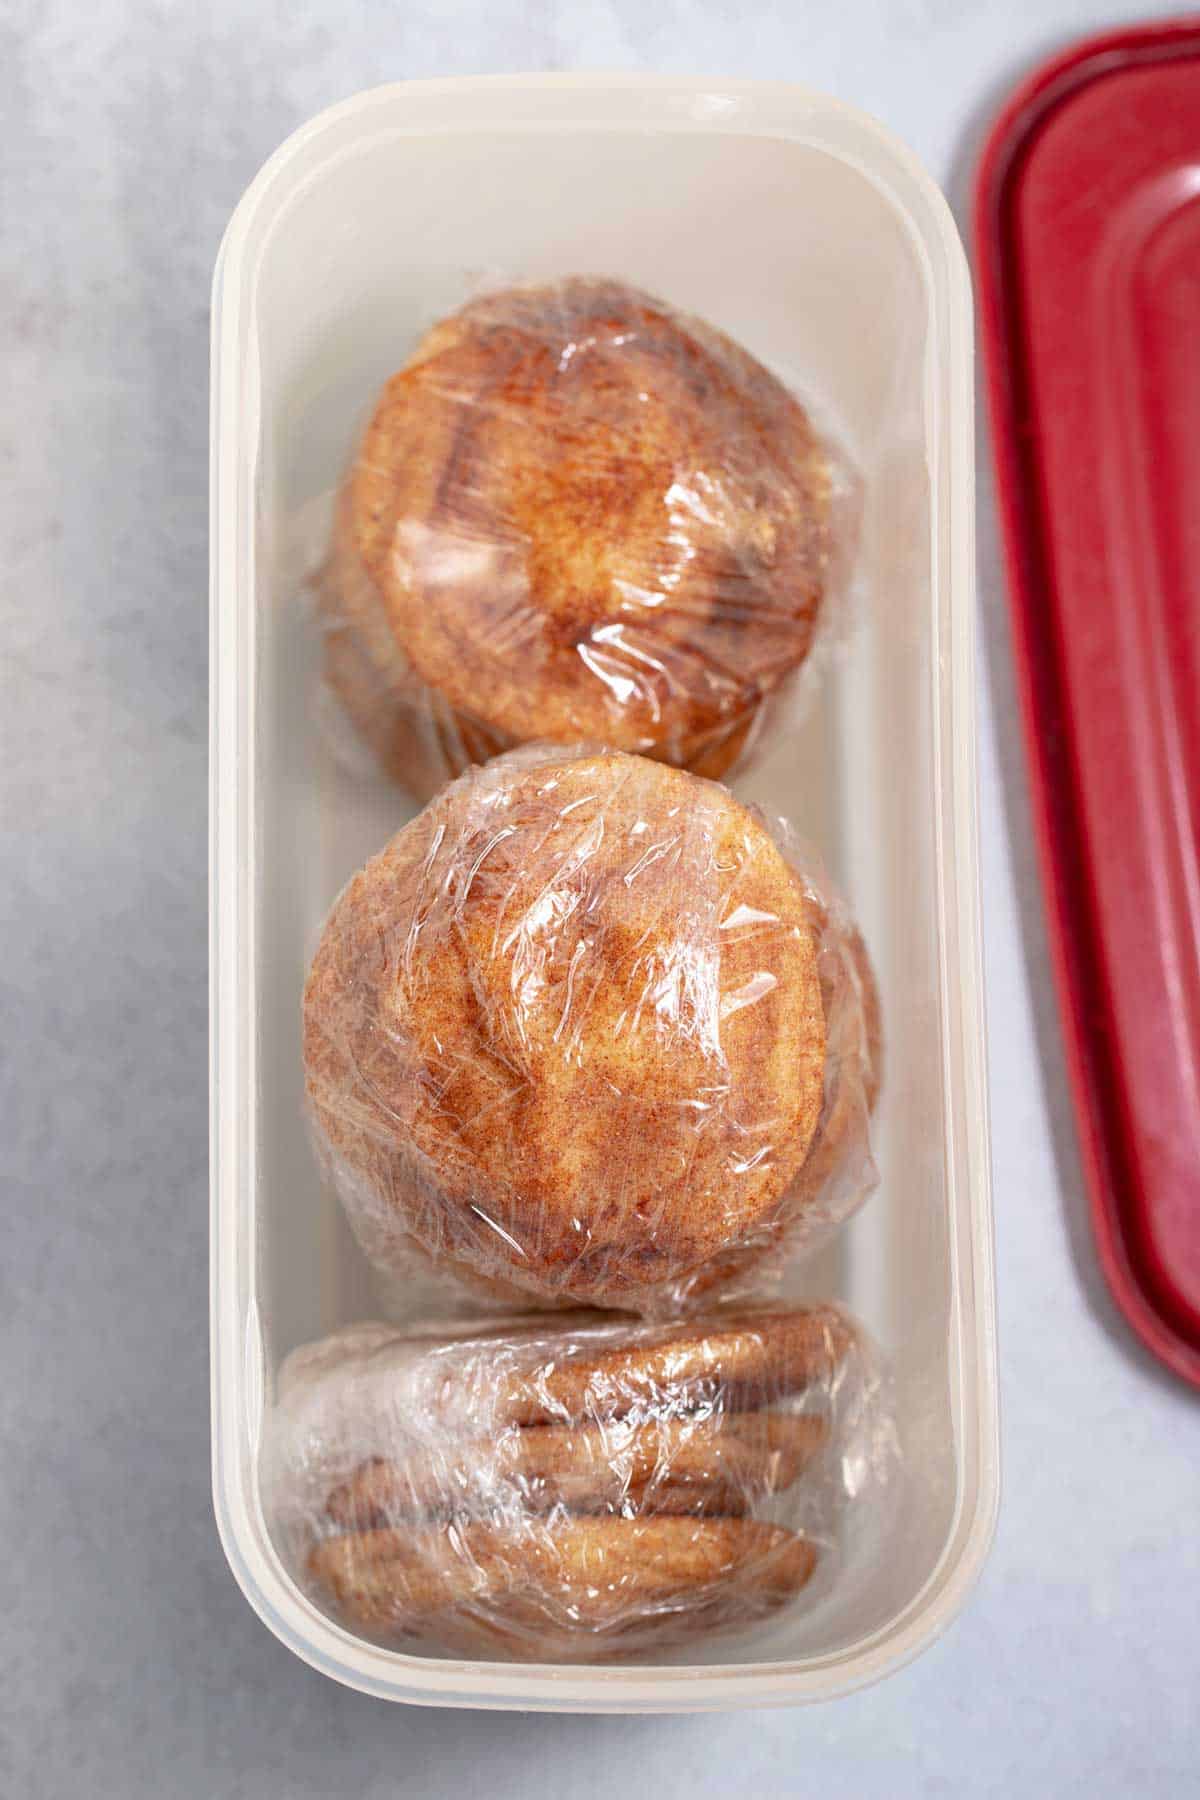 Cookies wrapped in plastic wrap and then placed in an airtight container for storage.